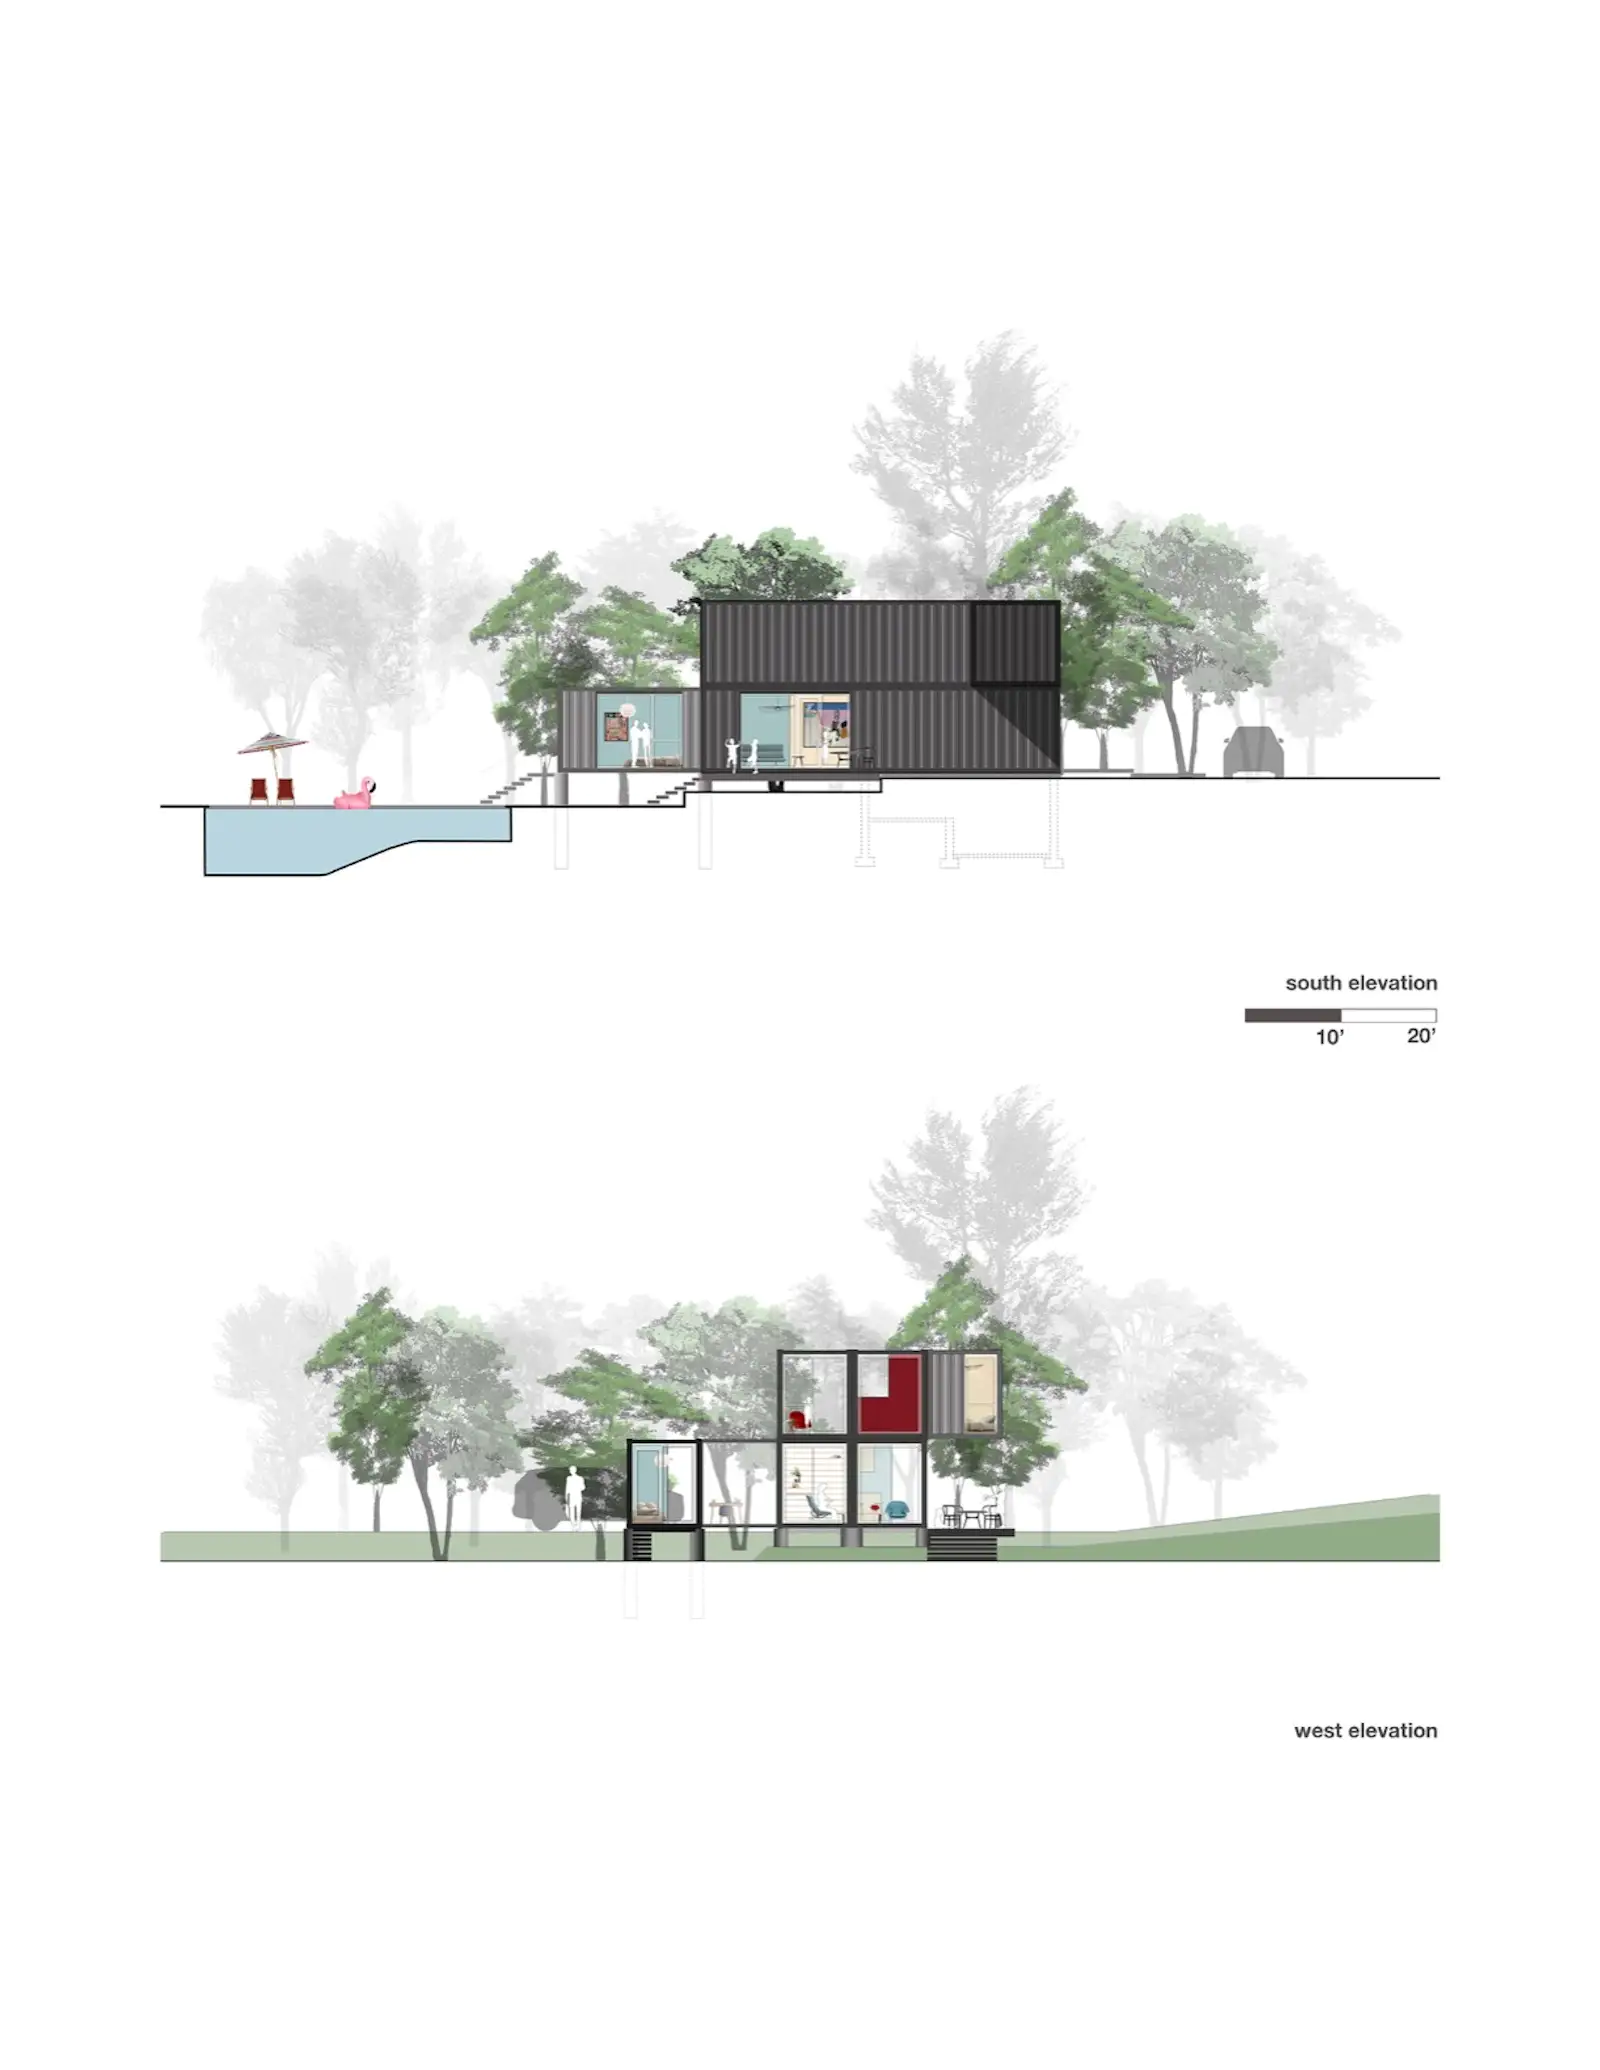 Elevation plans of the shipping containers